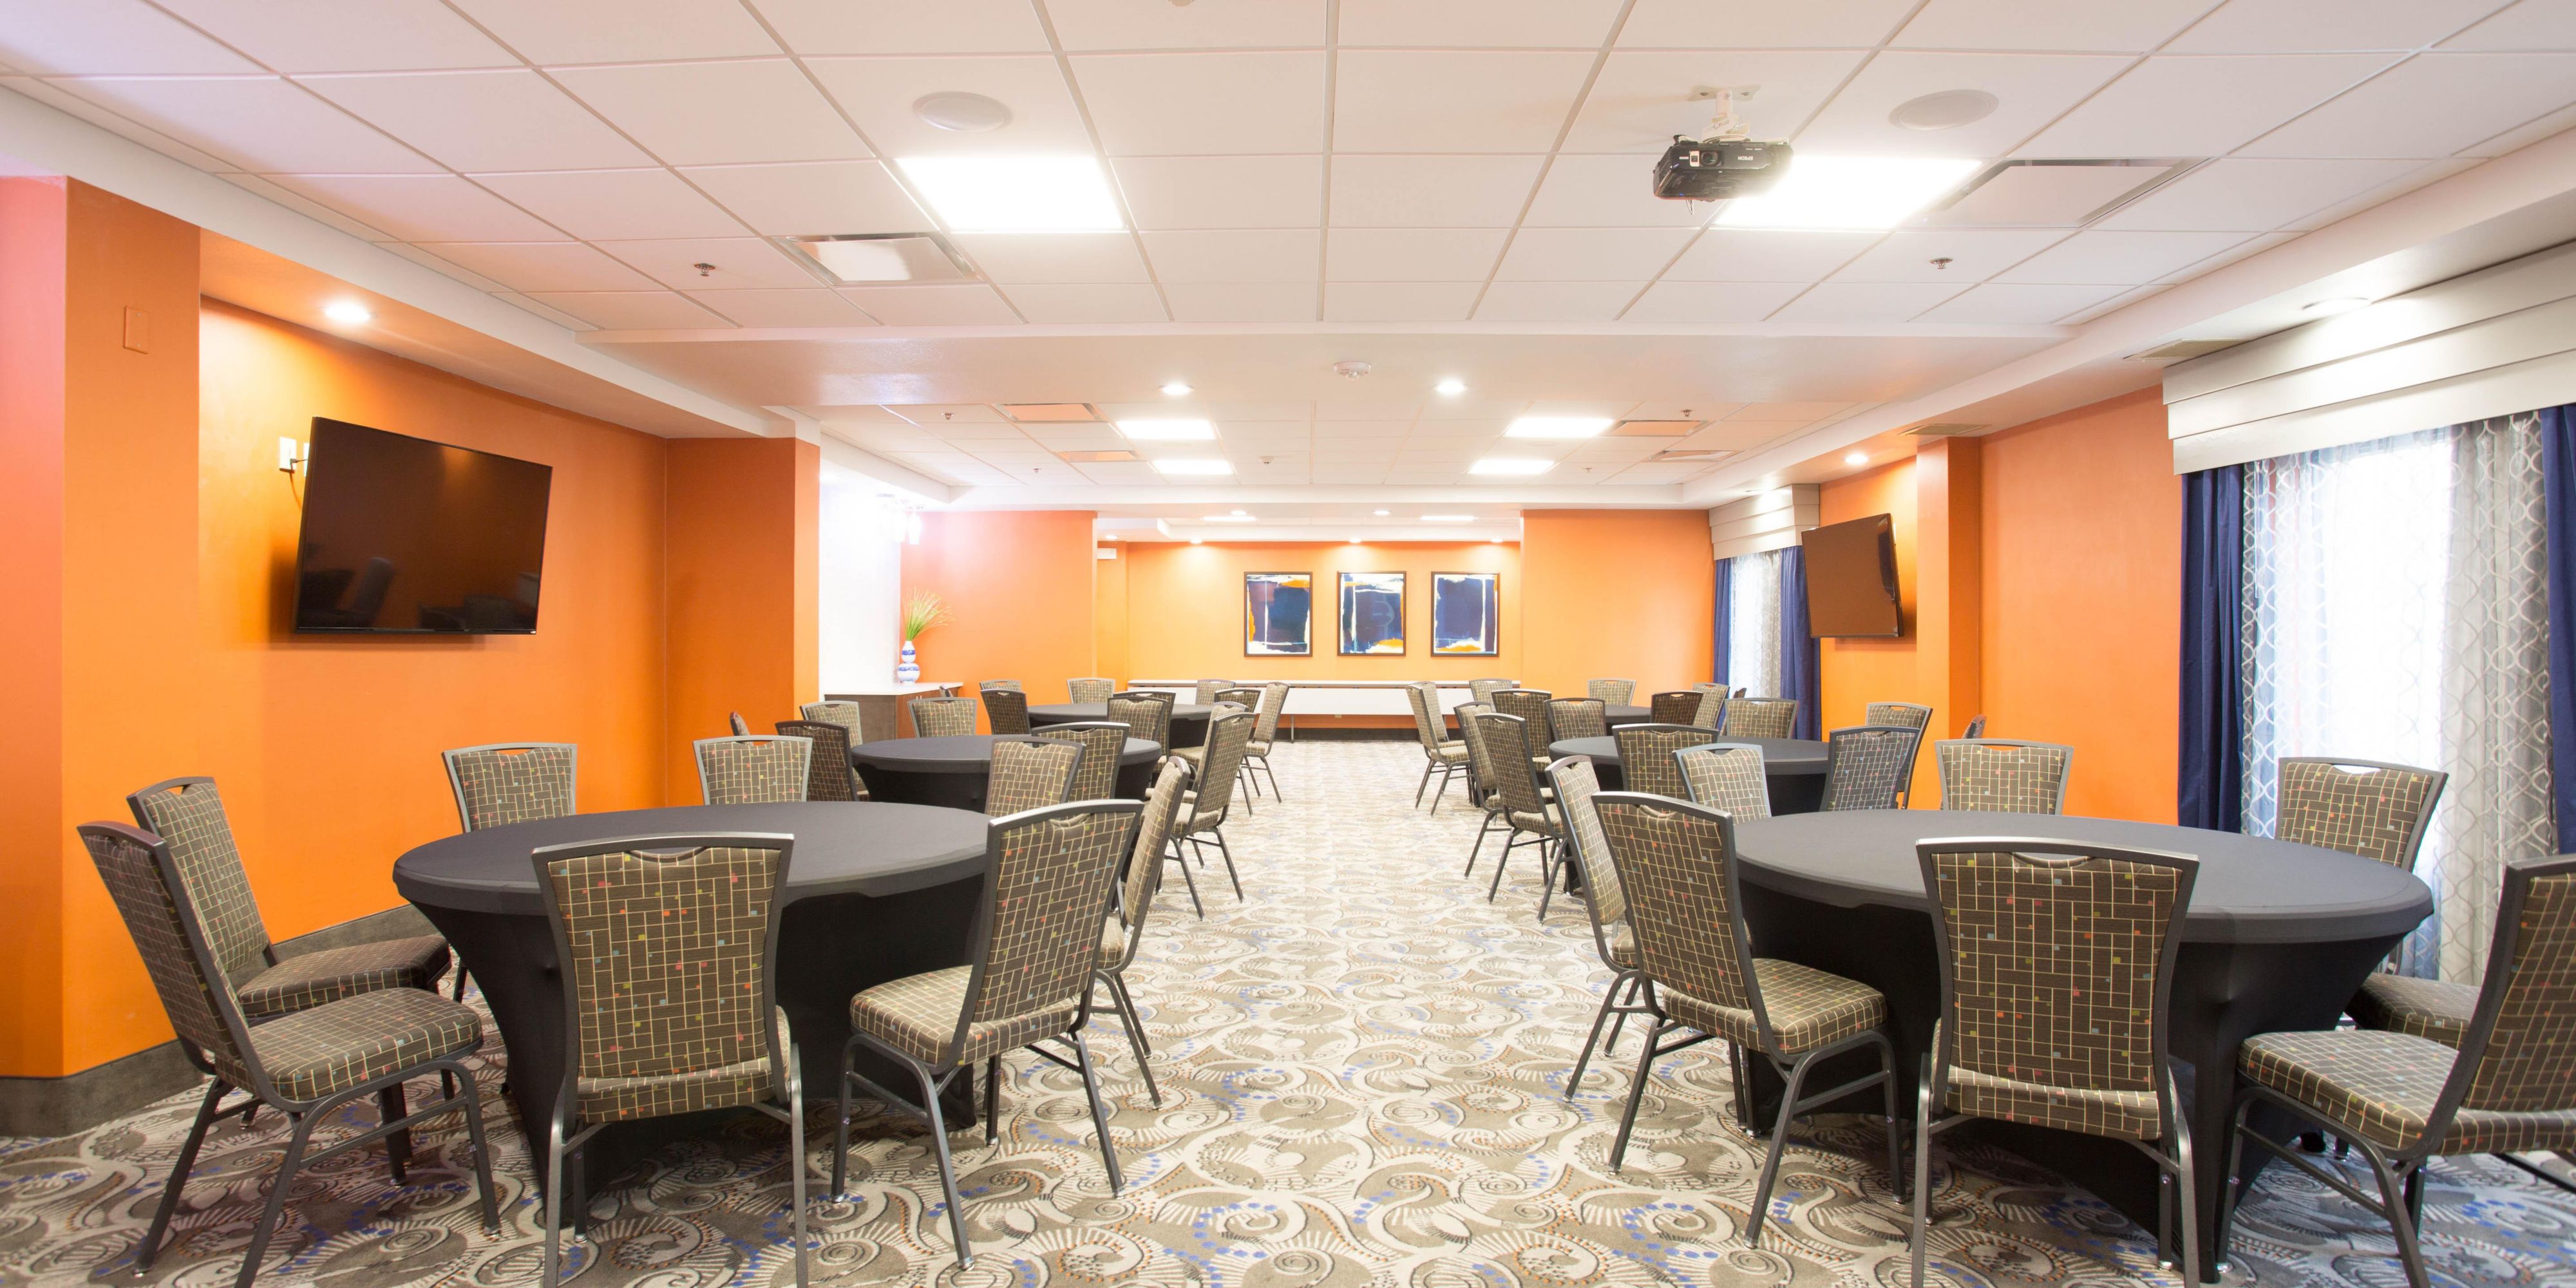 Our flexible meeting space is perfect for your next event for 10-100 guests. Onsite AV available, tables and chairs included, outside catering allowed.